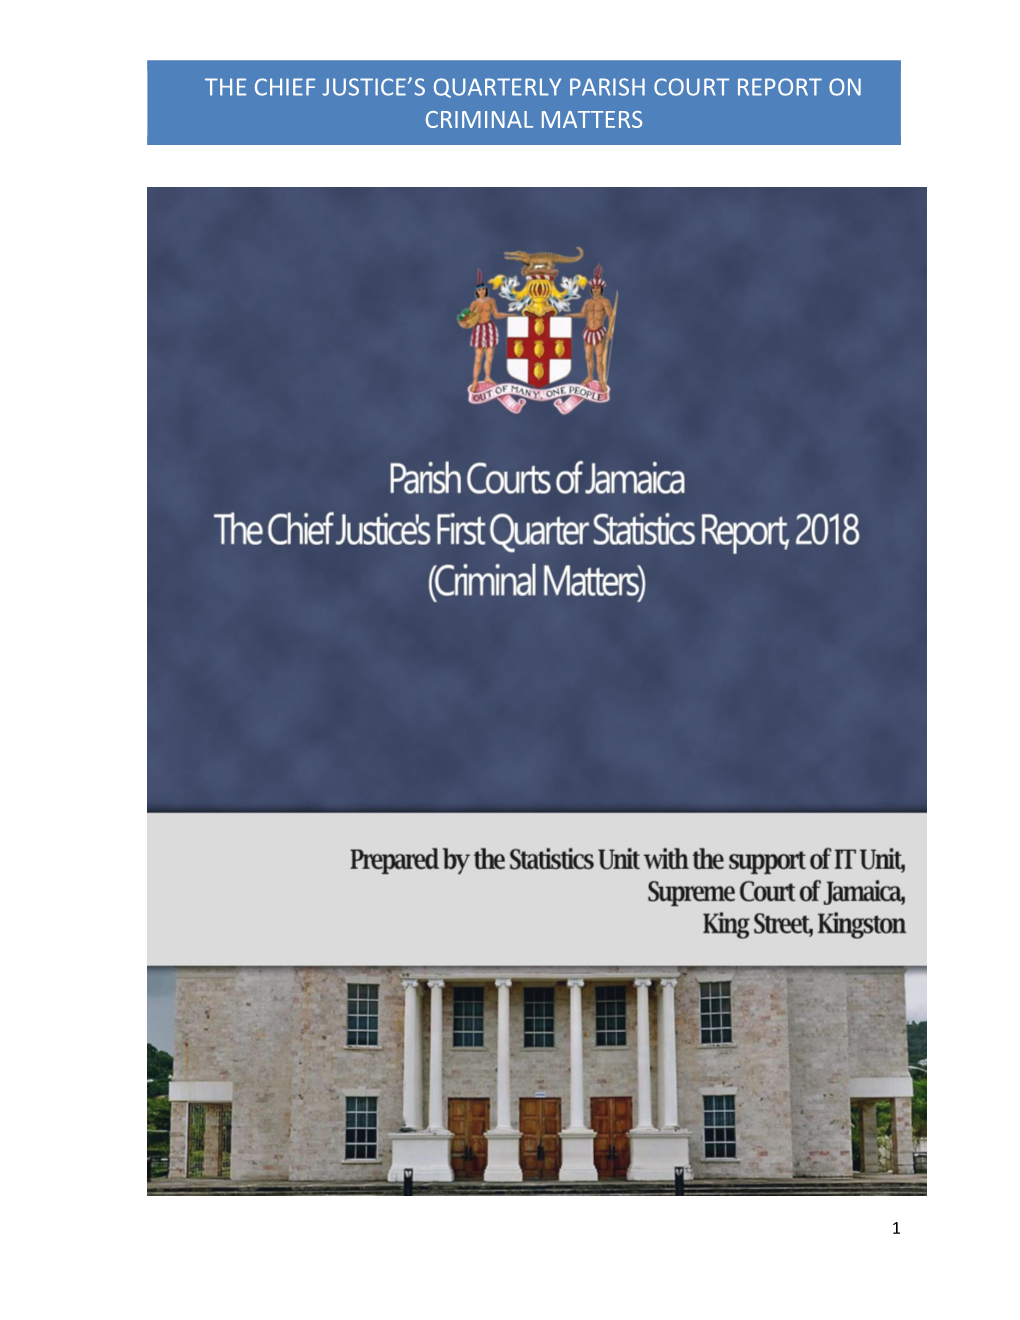 The Chief Justice's Quarterly Parish Court Report on Criminal Matters